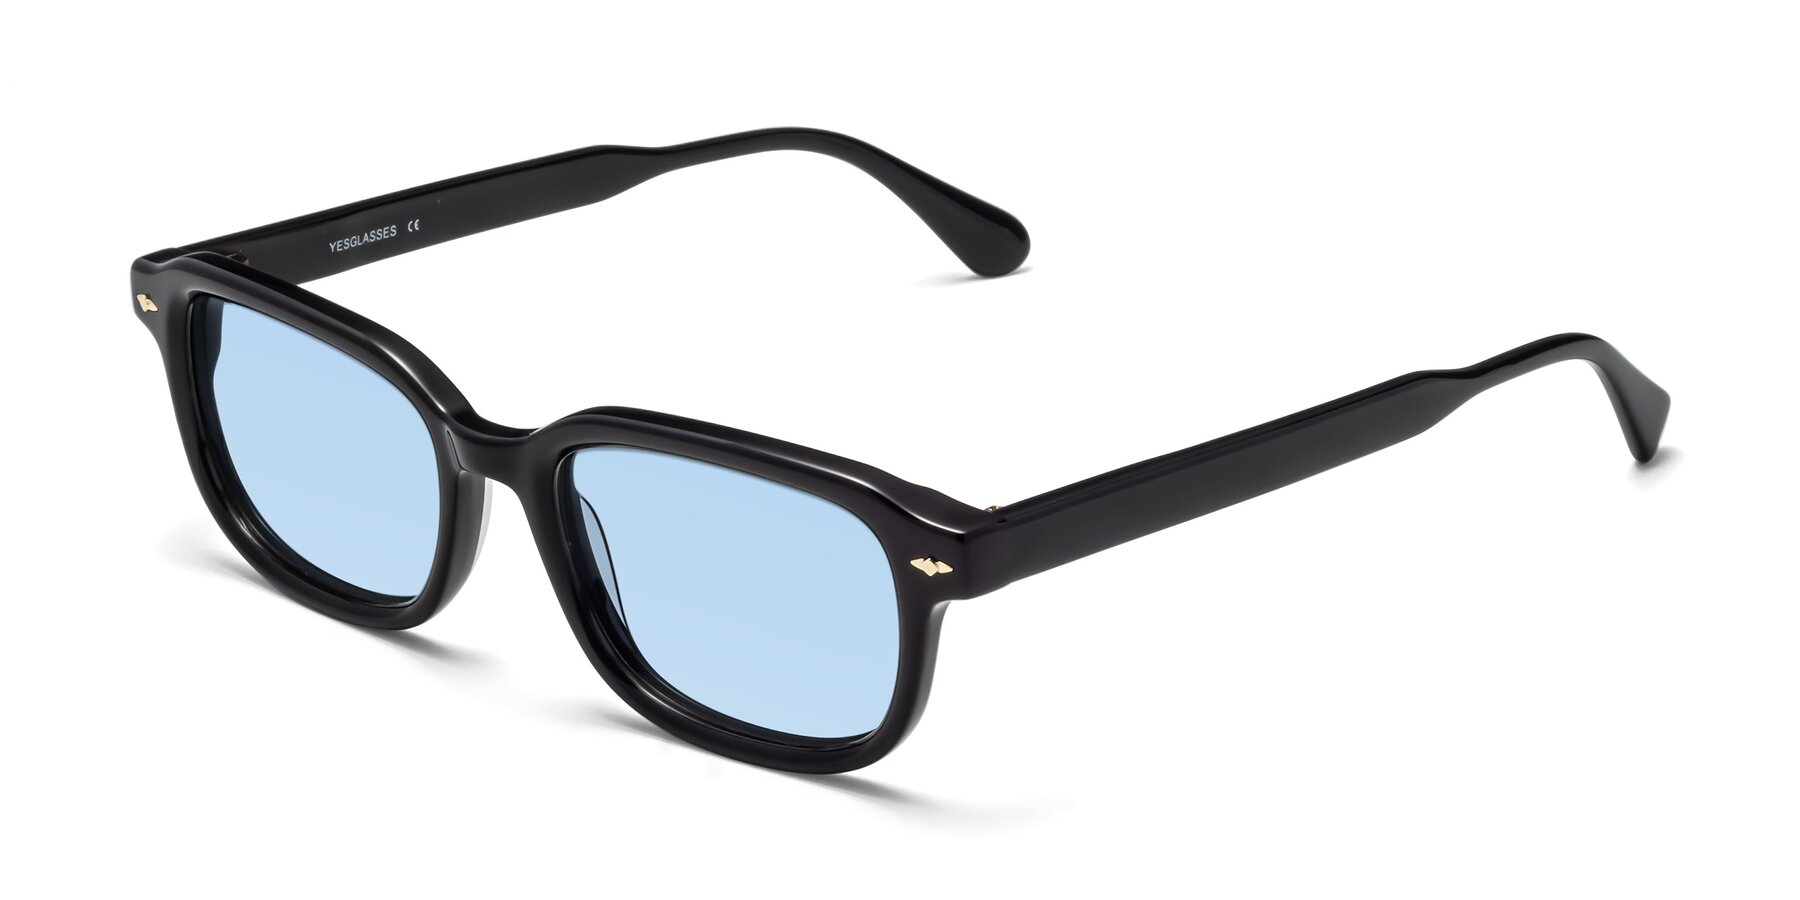 Angle of 1477 in Black with Light Blue Tinted Lenses